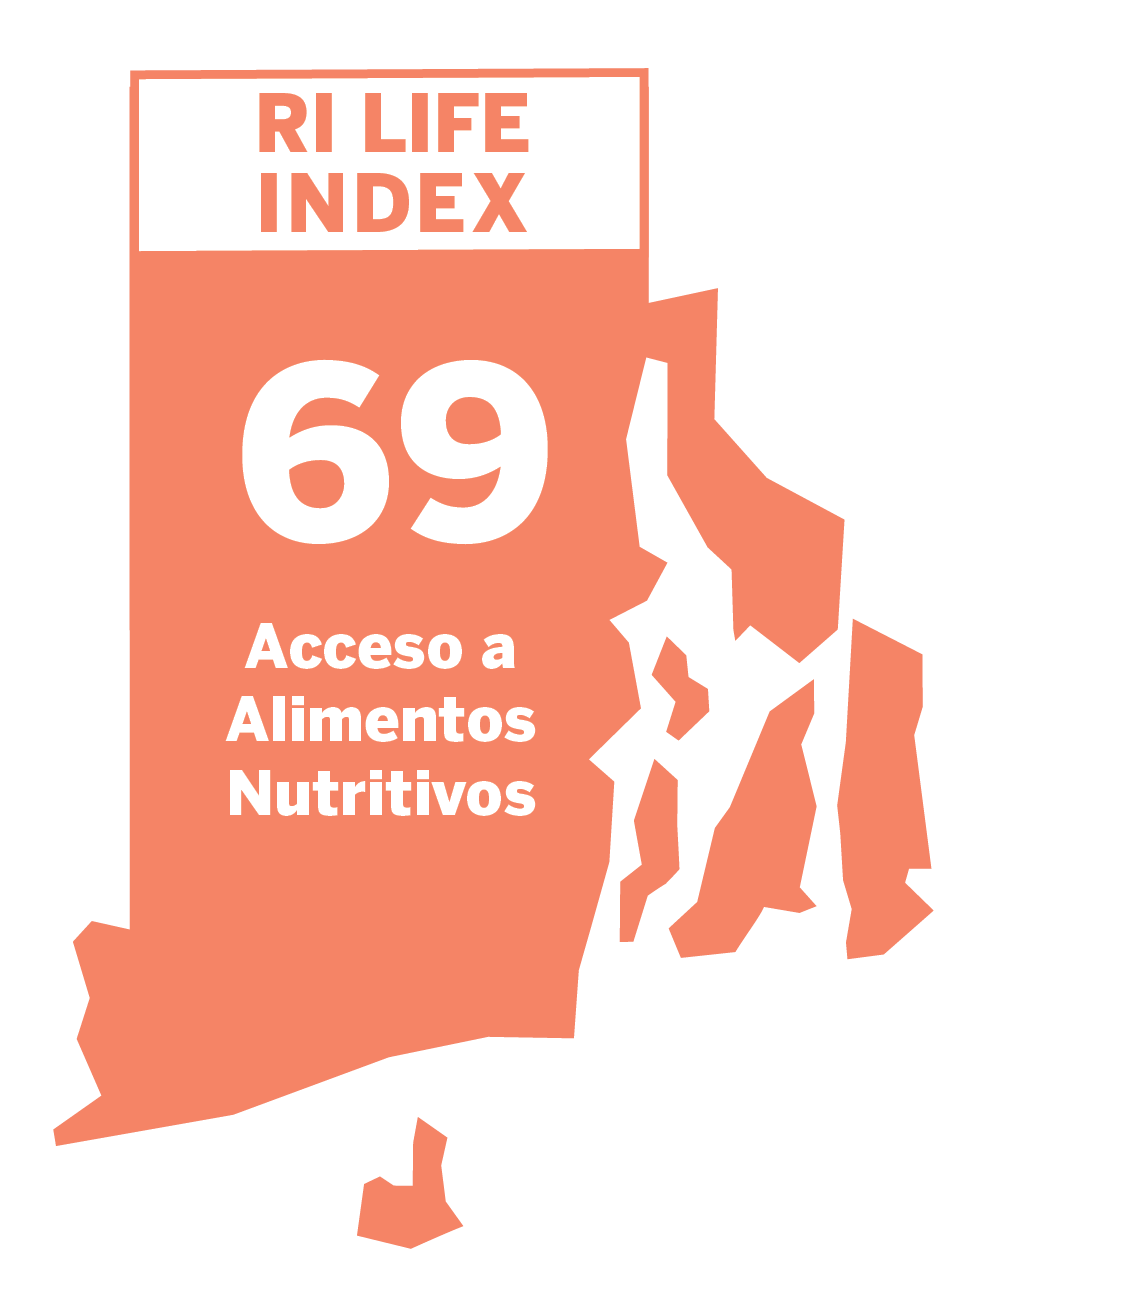 Access to Nutritious Food: 69